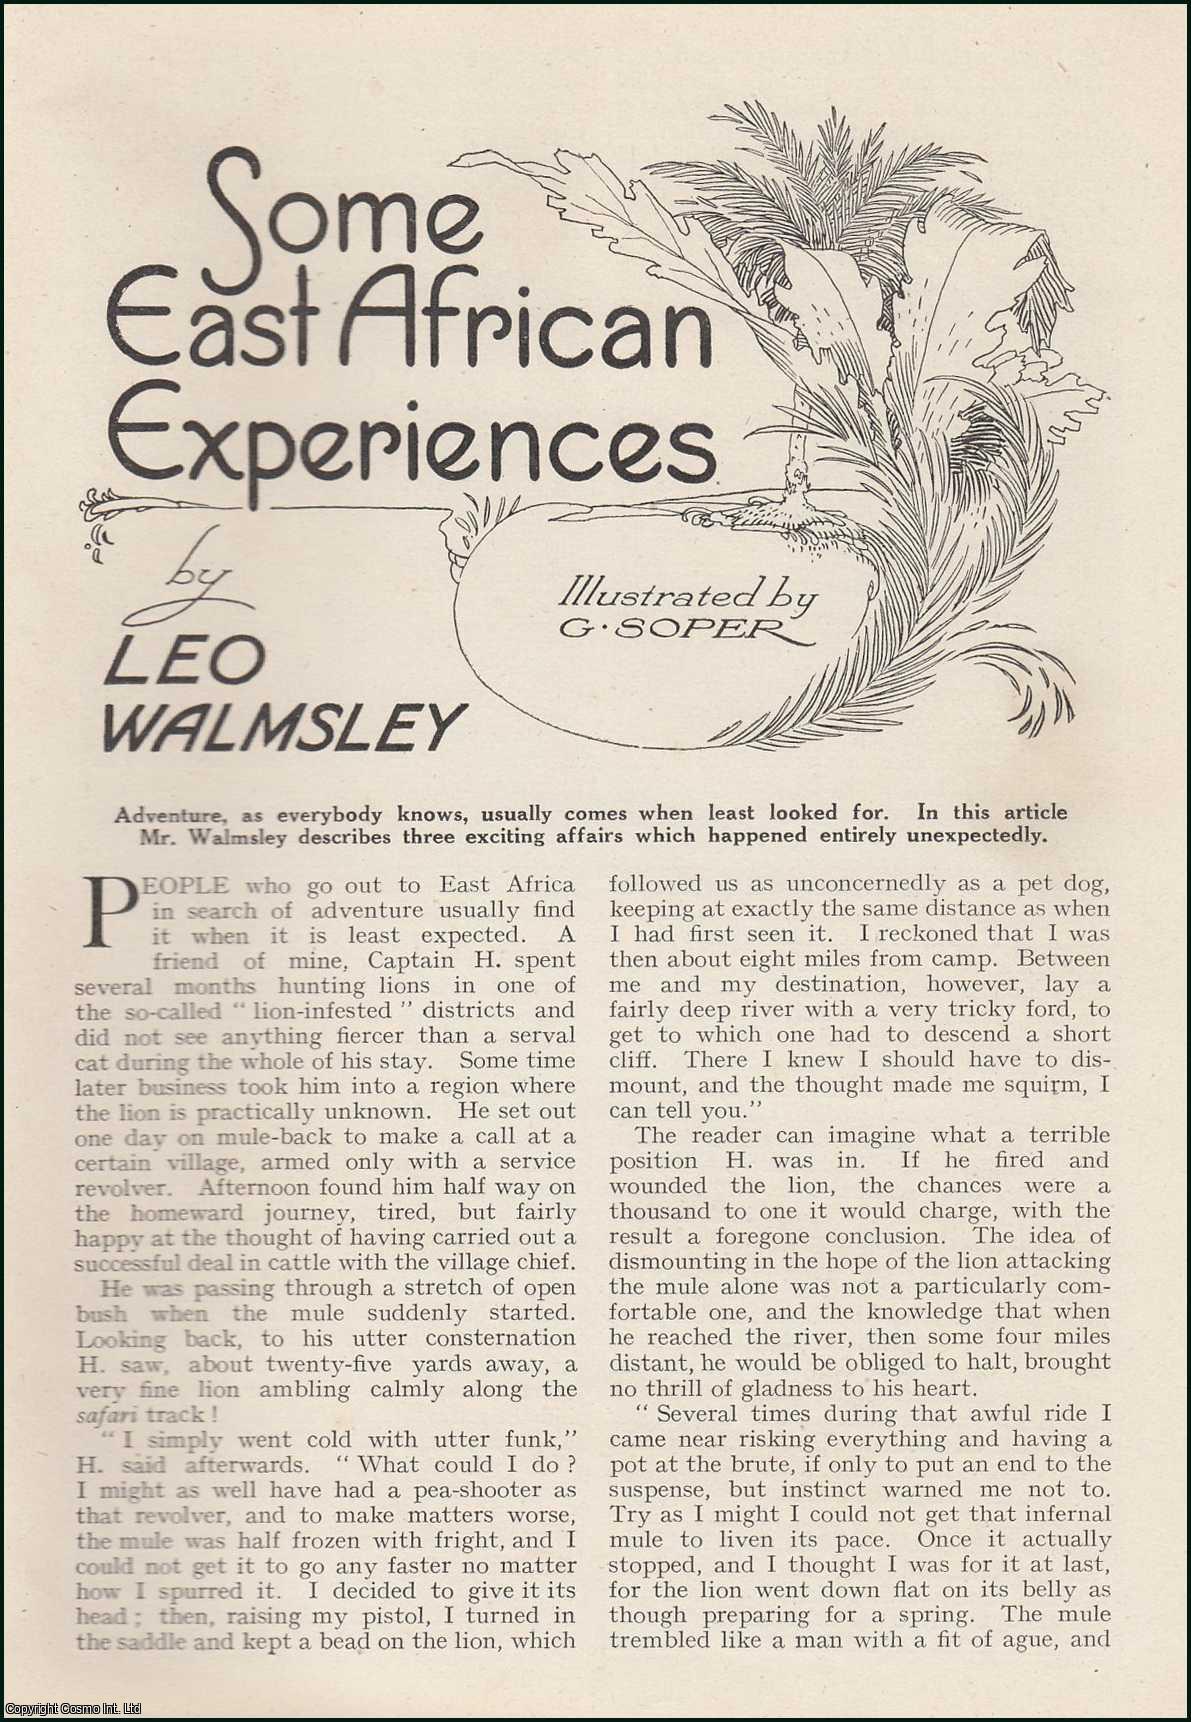 Leo Walmsley. Illustrated by G. Soper. - Some East African Experiences. An uncommon original article from the Wide World Magazine, 1921.